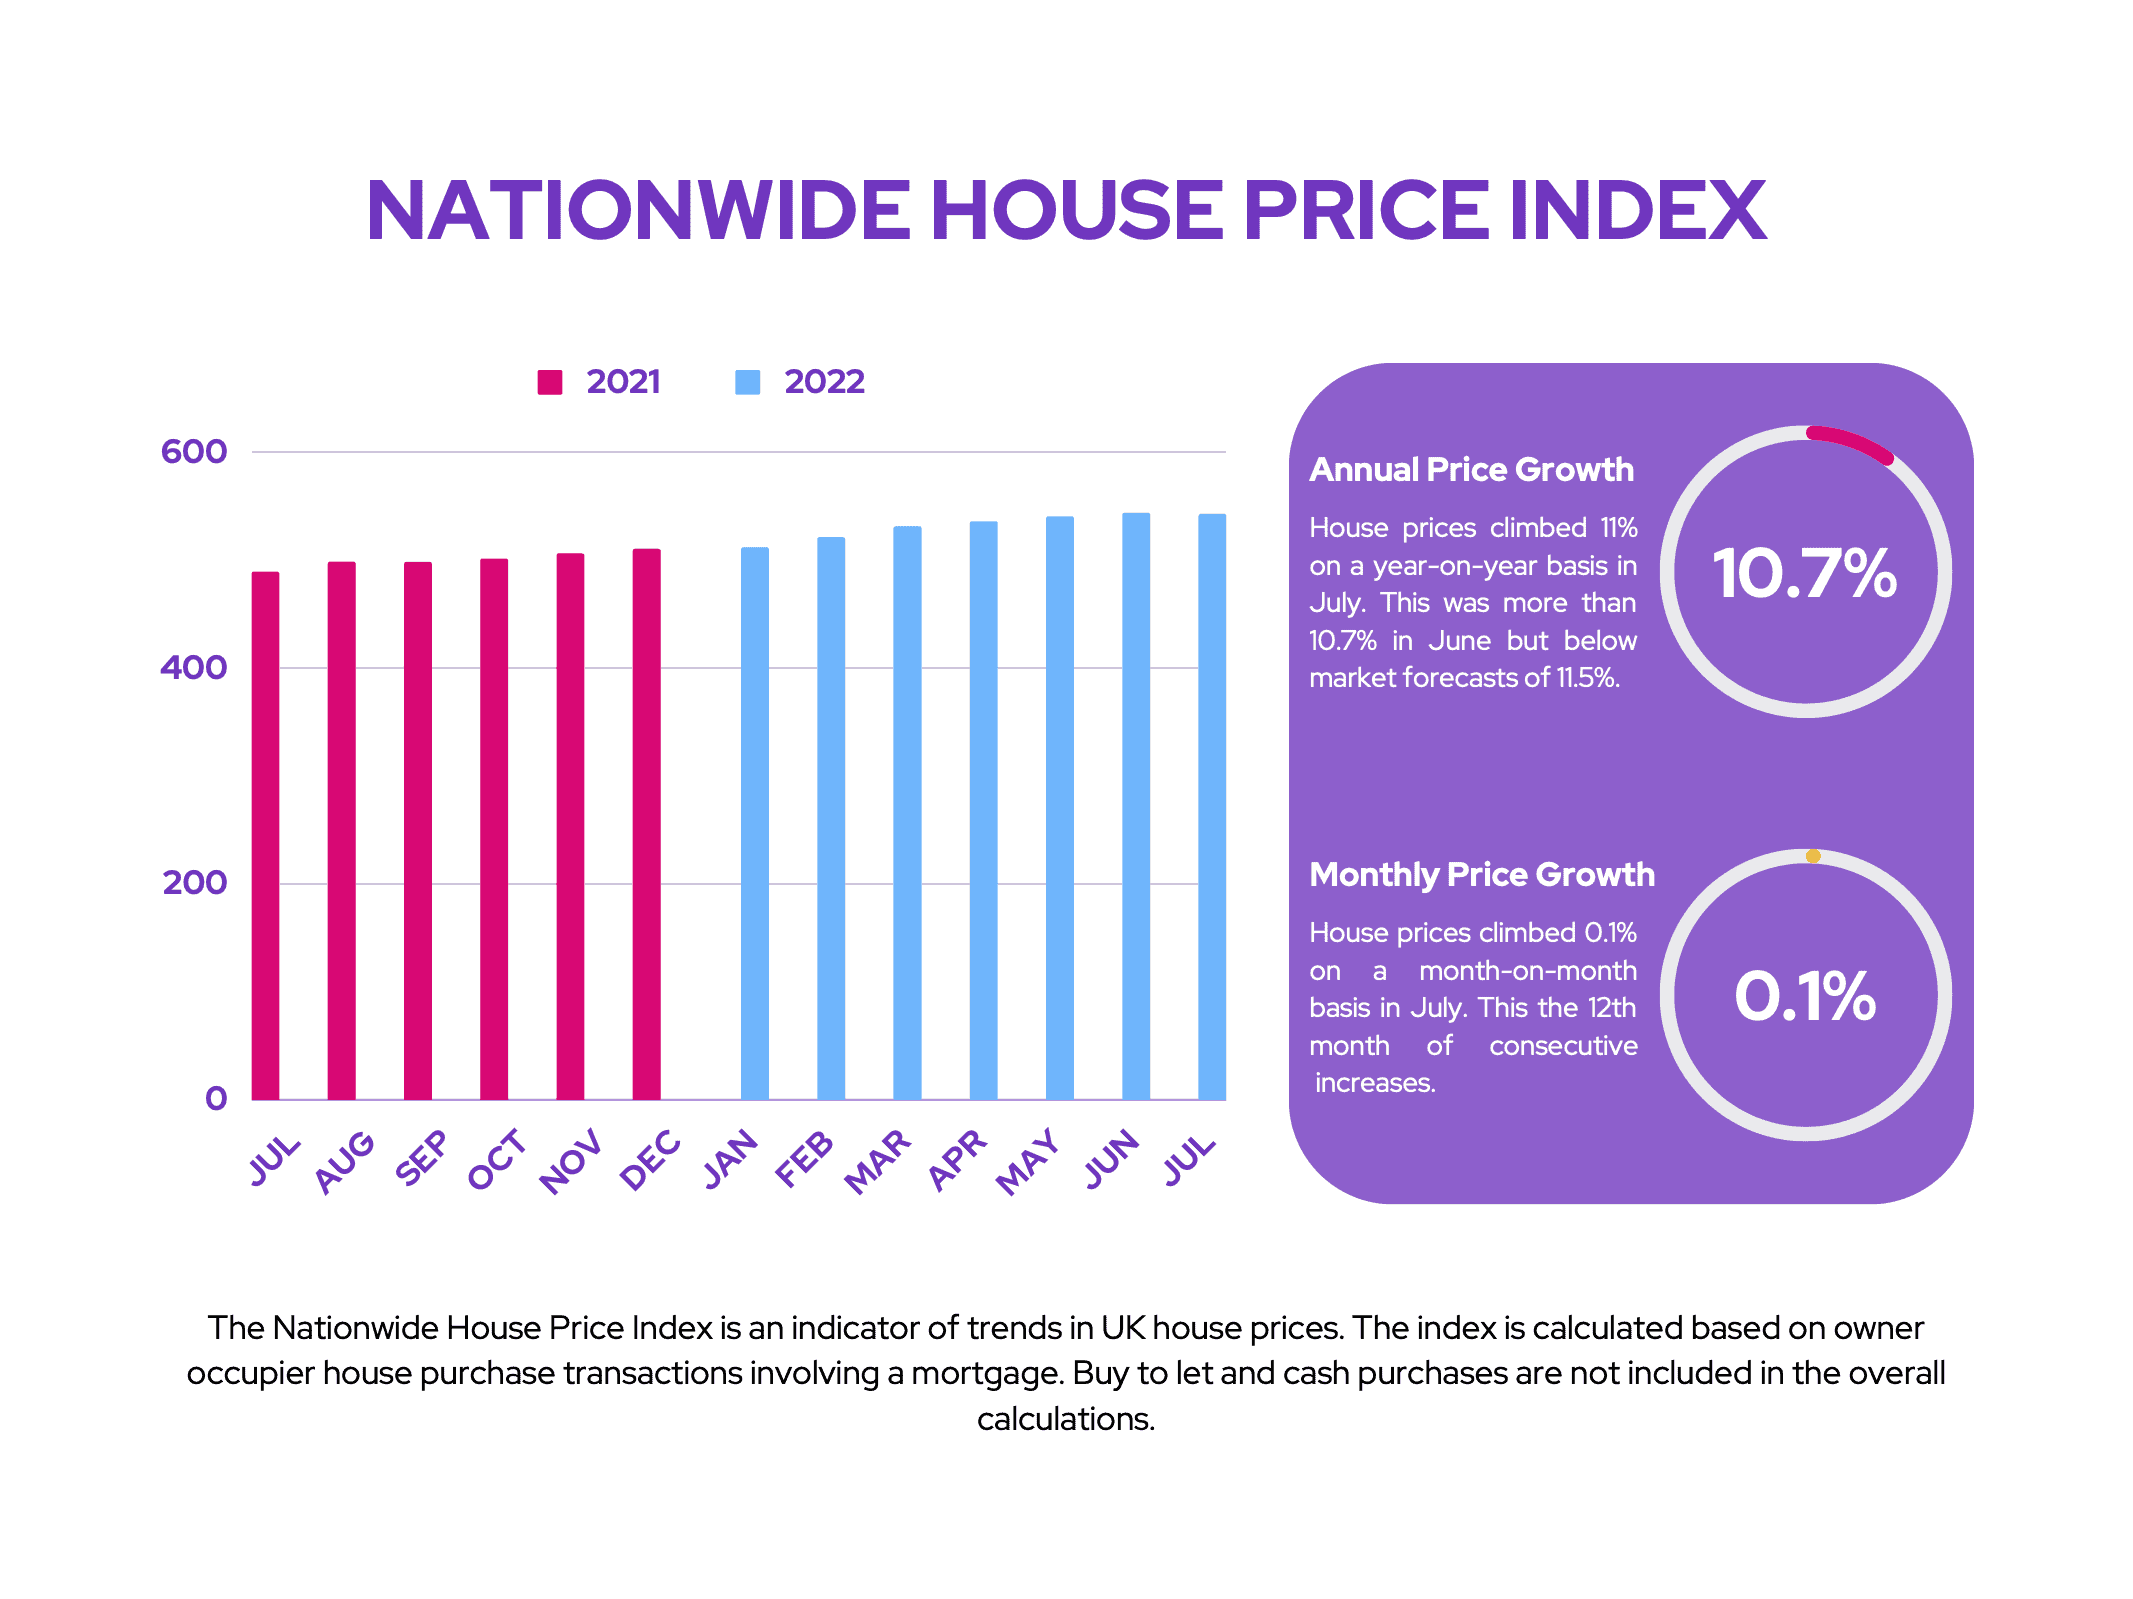 Taylor Wimpey: Nationwide House Price Index (July 2022)